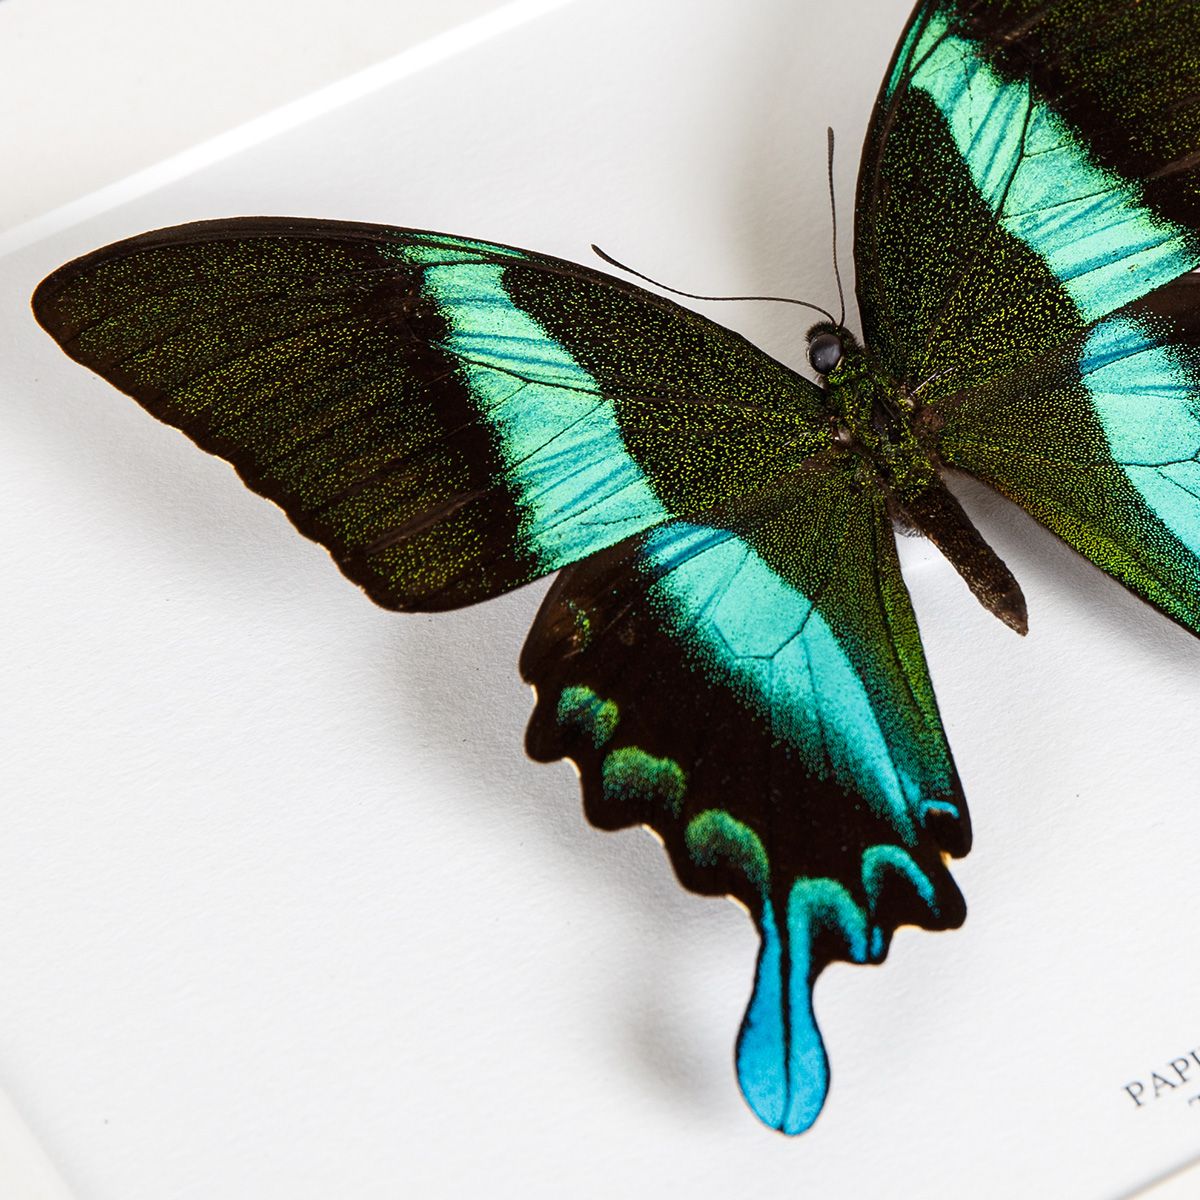 The Peacock Butterfly in Box Frame (Papilio blumei)